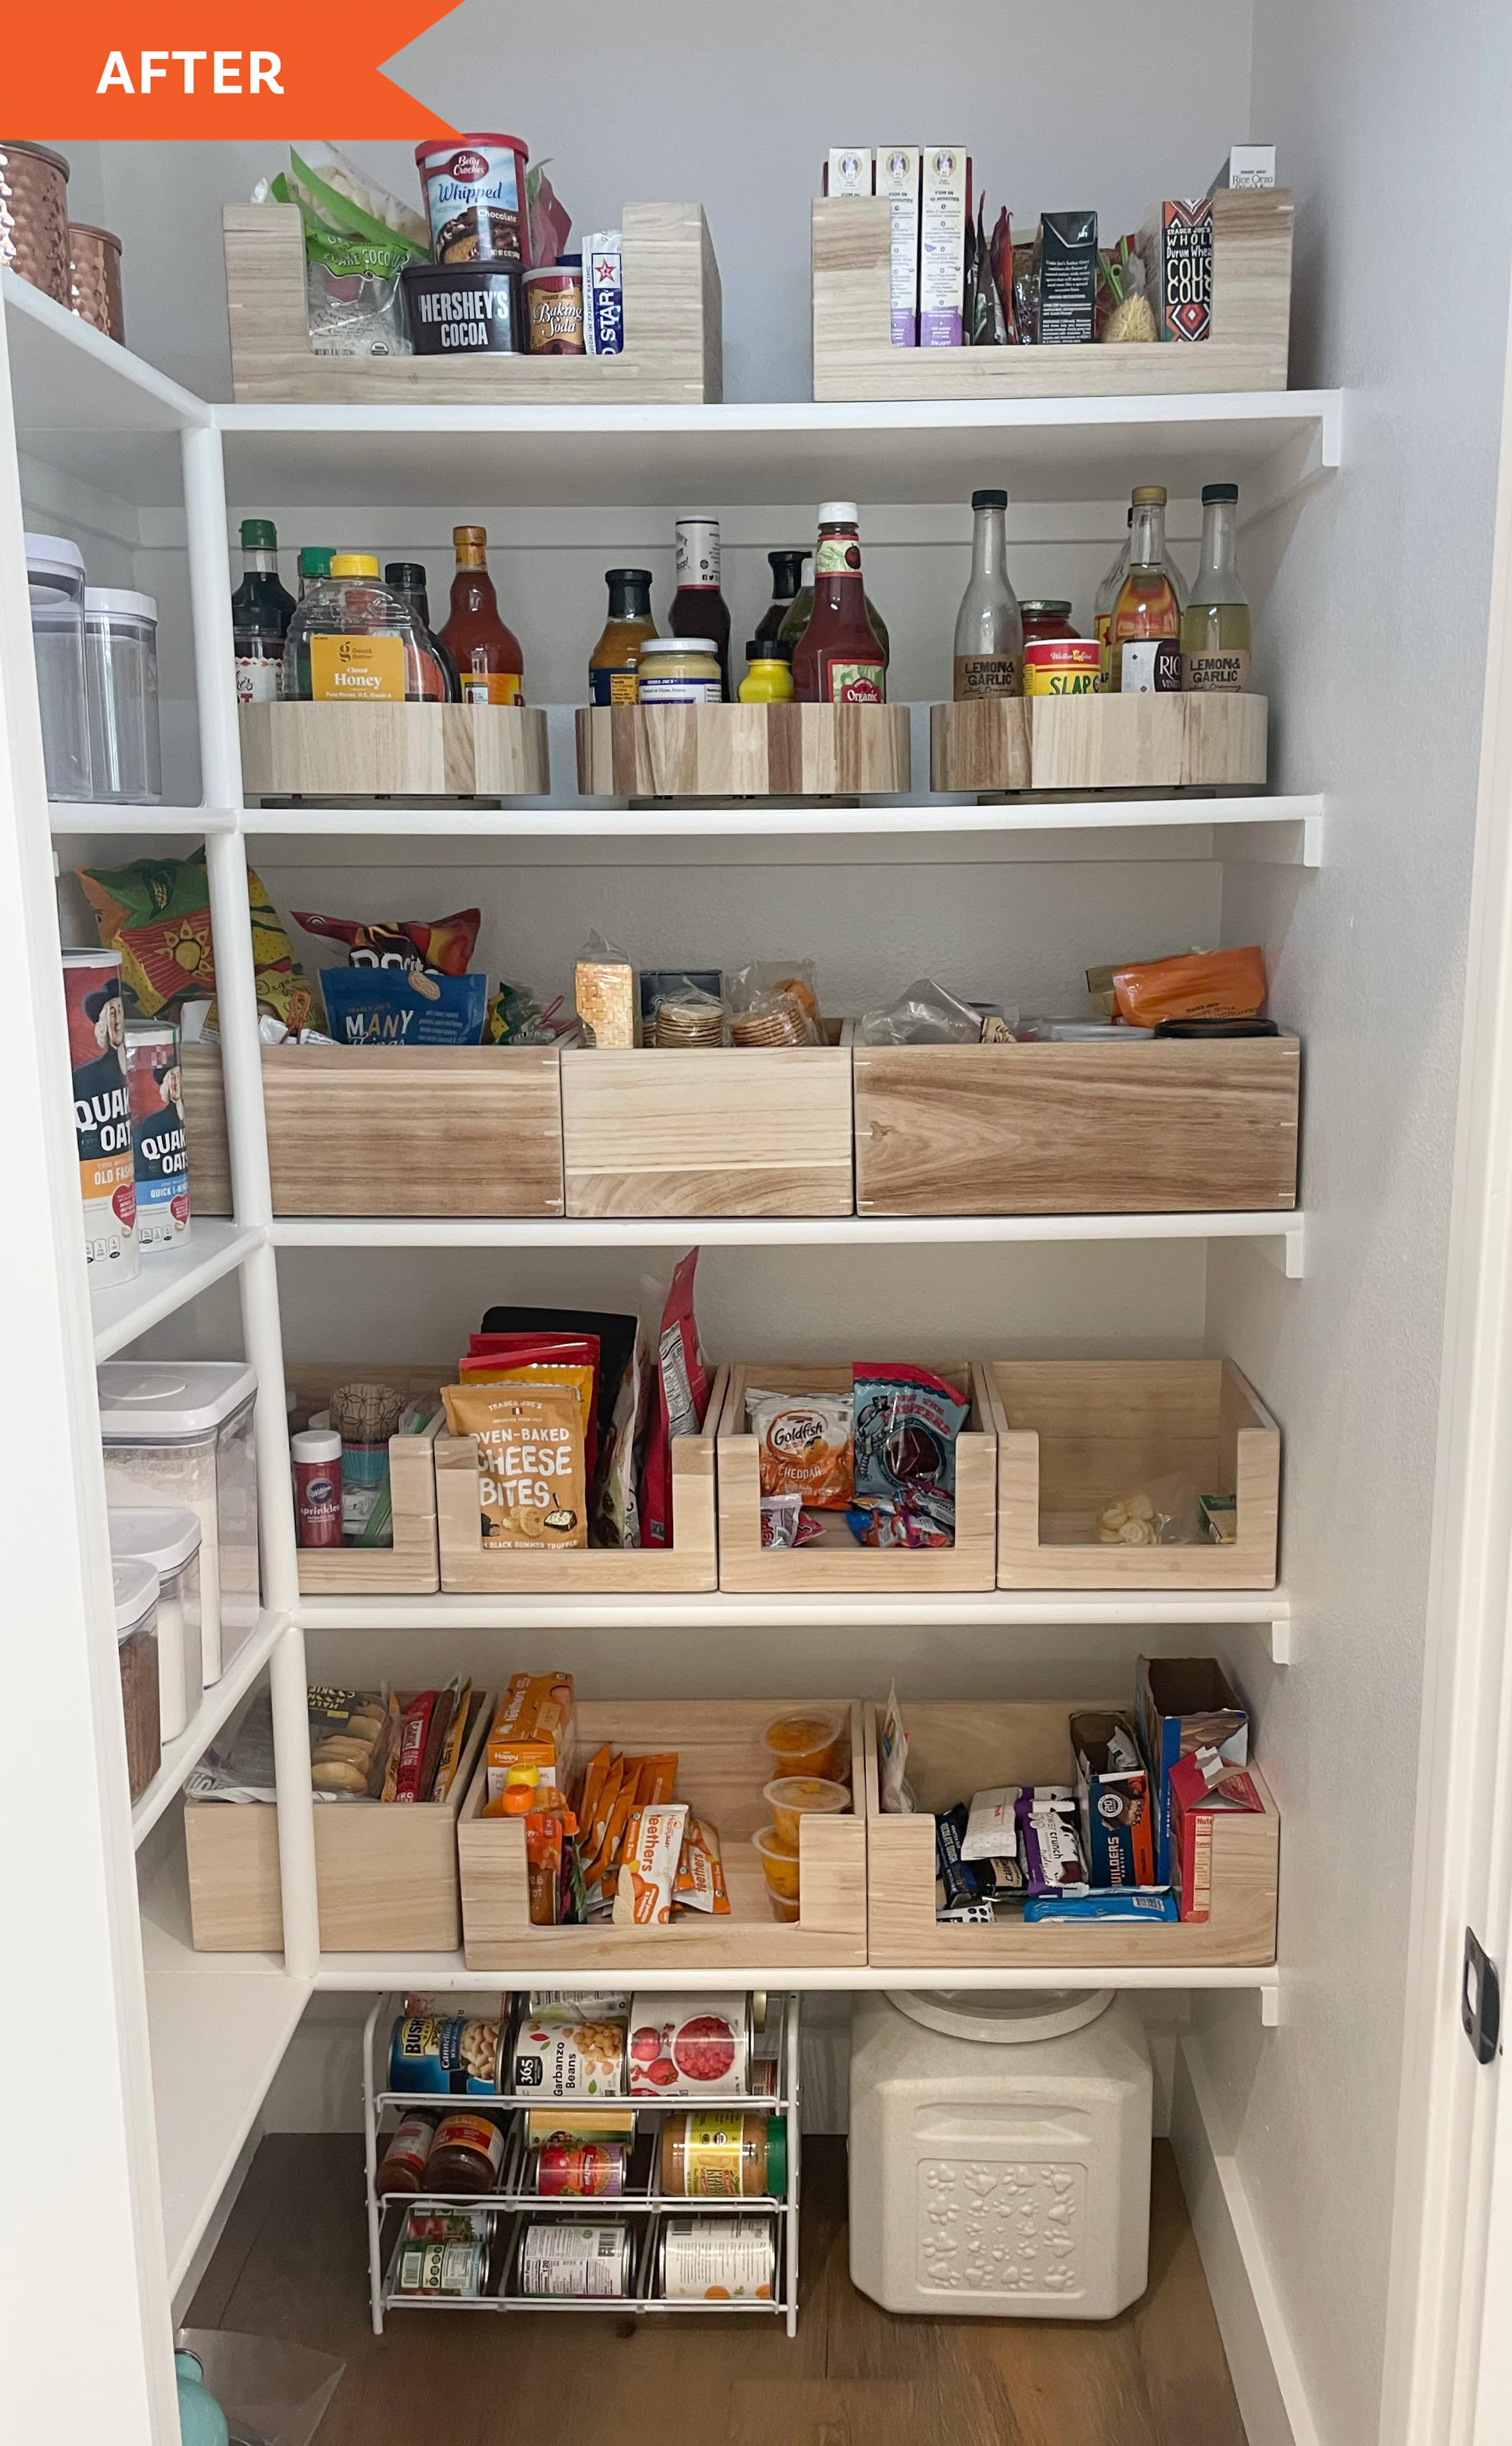 https://cdn.apartmenttherapy.info/image/upload/v1662995802/at/organize-clean/before-after/Nicole%20Bolf%20Pantry/NicoleBolf_After1.jpg